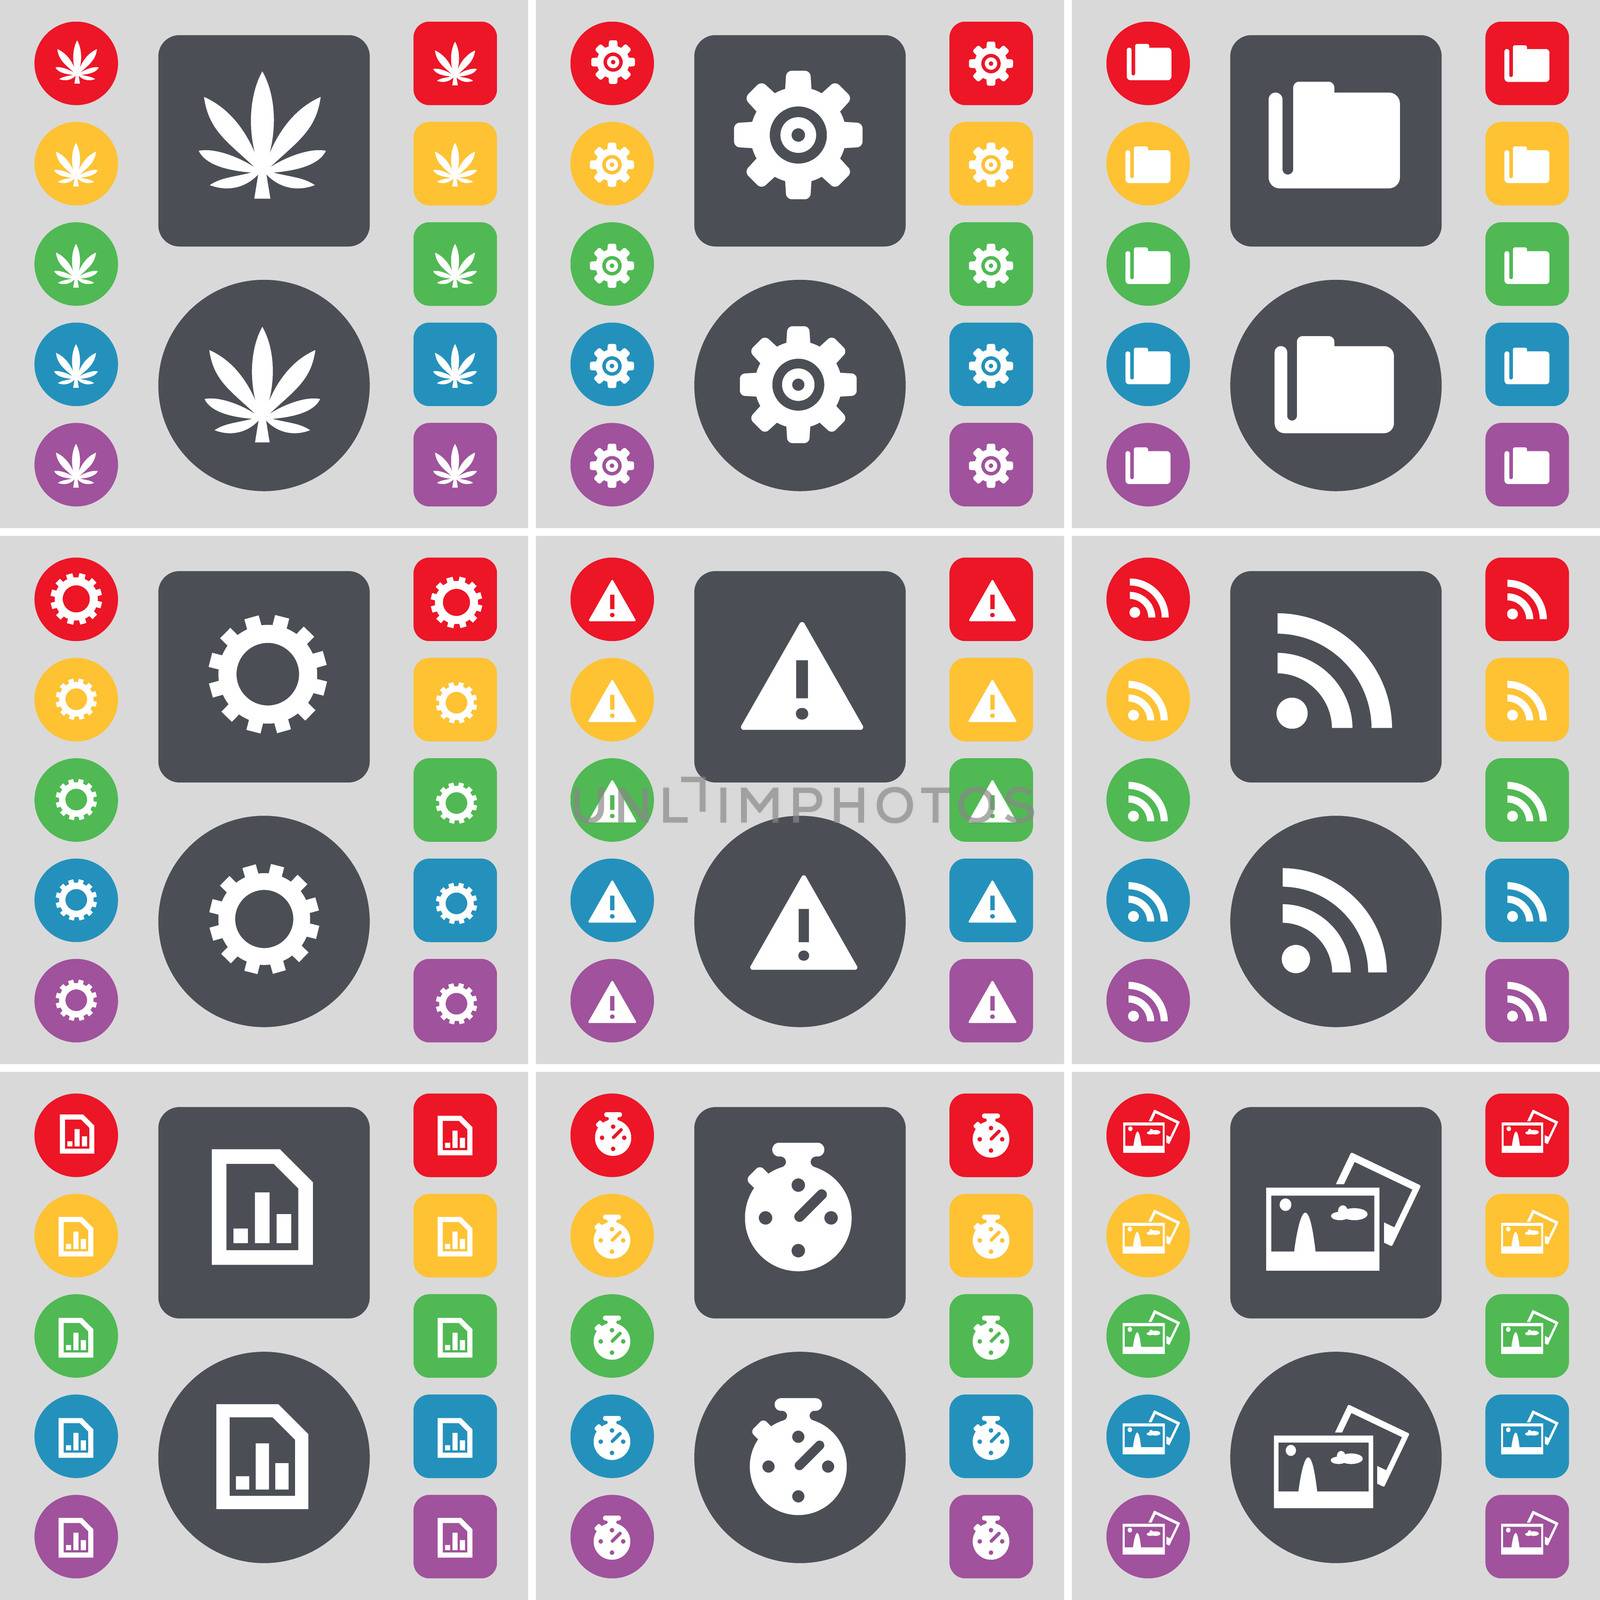 Marijuana, Gear, Folder, Gear, Warning, RSS, Diagram file, Stopwatch, Picture icon symbol. A large set of flat, colored buttons for your design.  by serhii_lohvyniuk